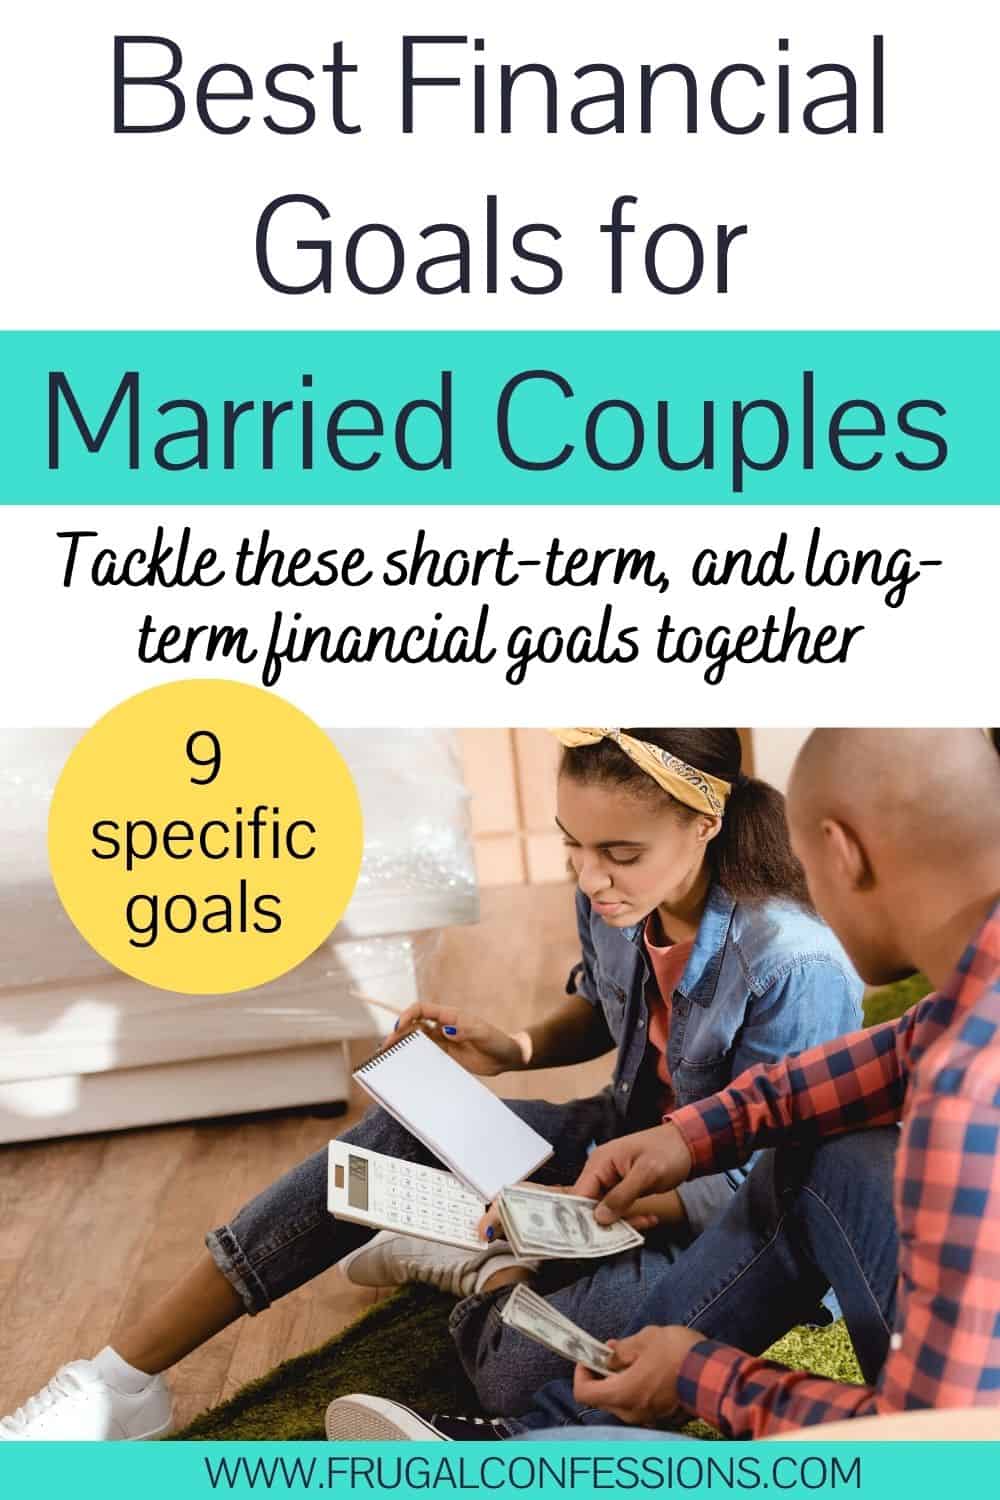 young couple with calculator, money, pad of paper and pen on ground, text overlay "best financial goals for married couples"